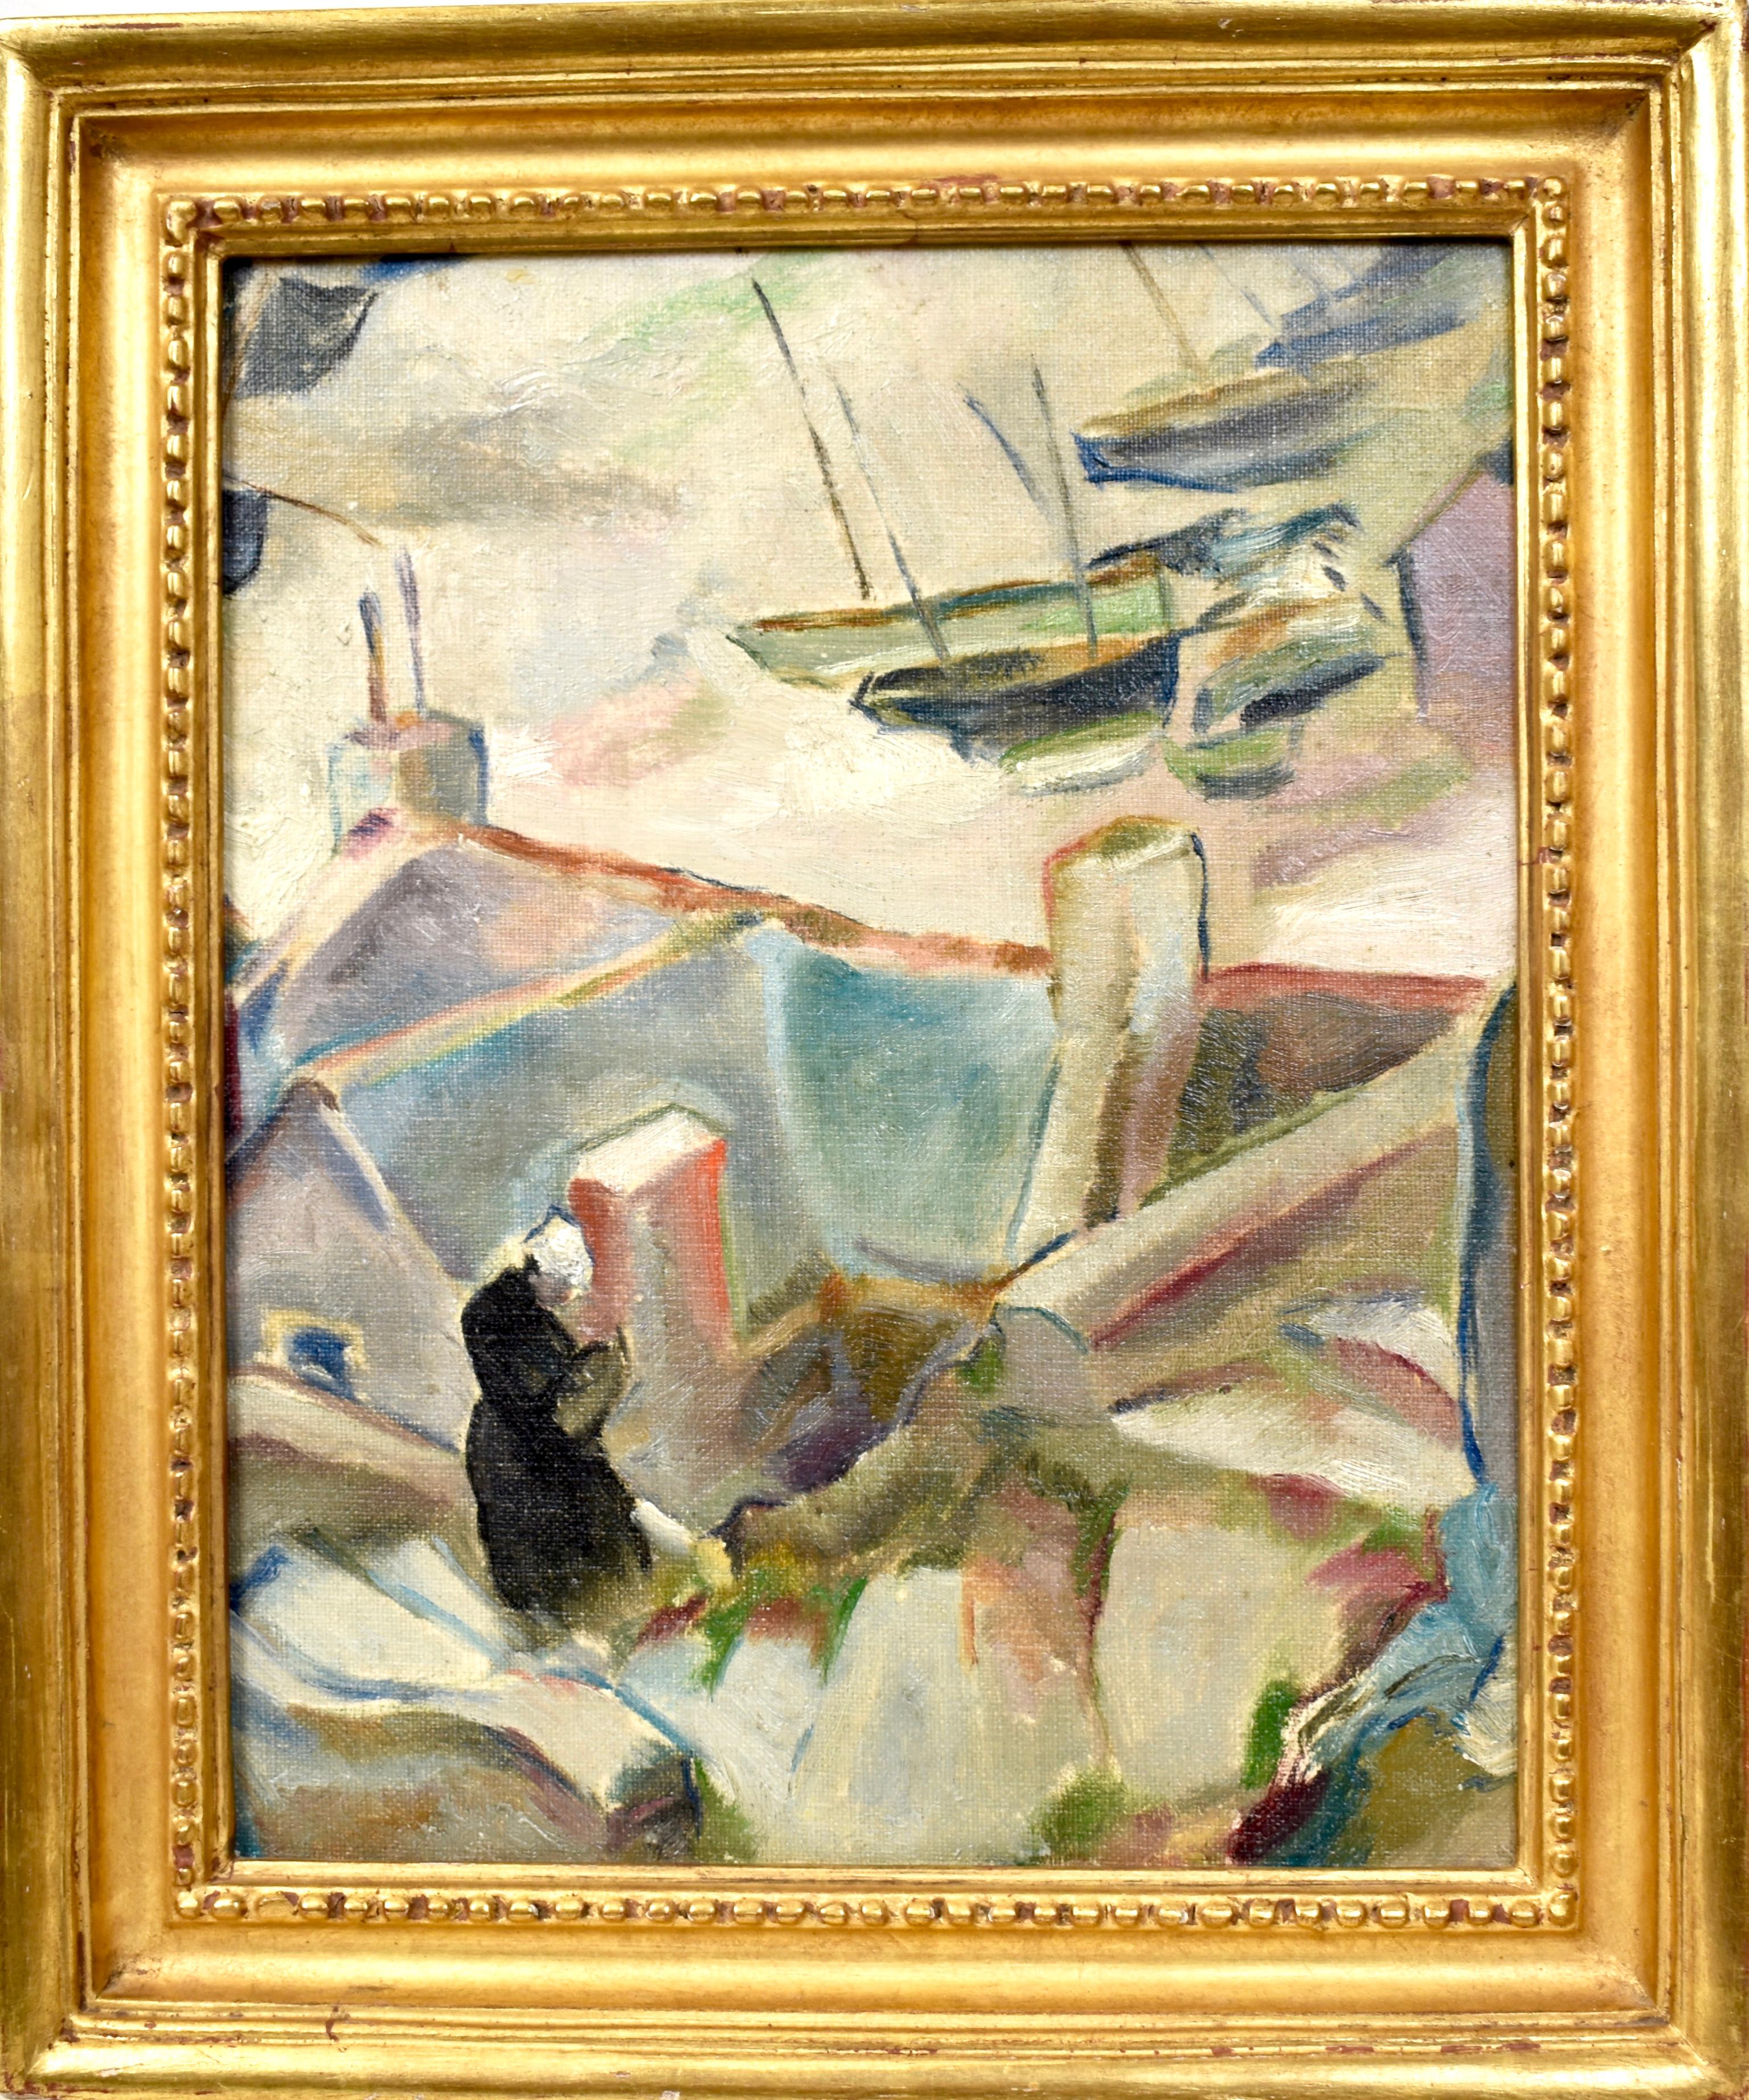 Unknown Abstract Painting – Paris Modern Cubist Abstracted Harbor View Original Antique Oil Painting